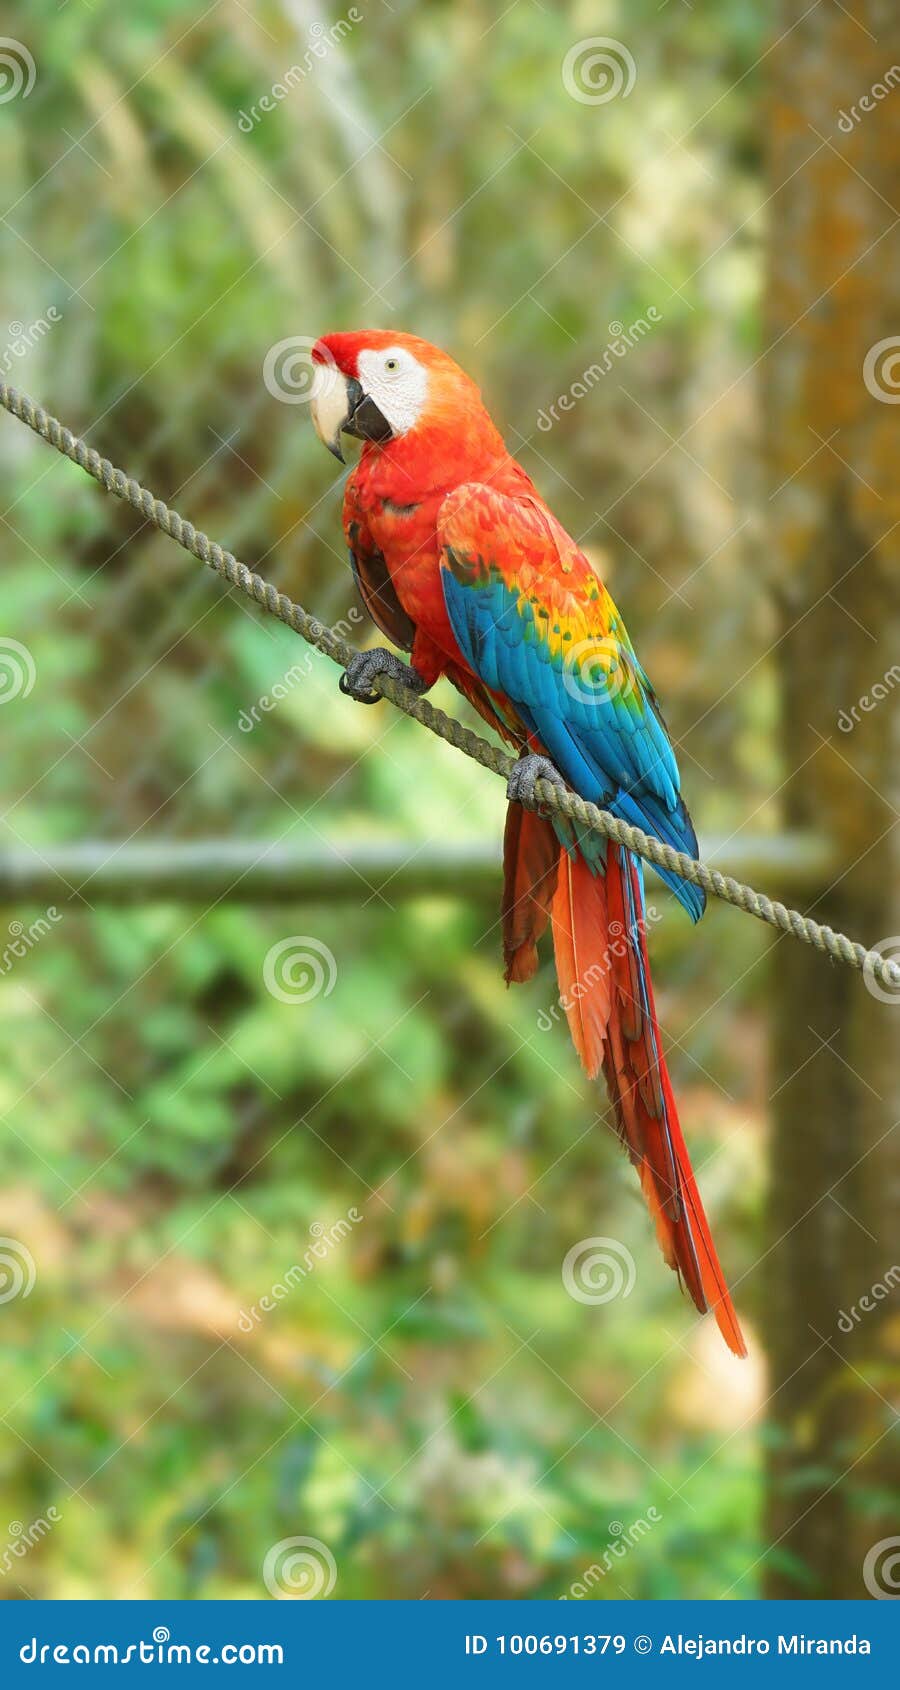 caged macaw on a rope in ecuadorian amazon. common names: guacamayo or papagayo